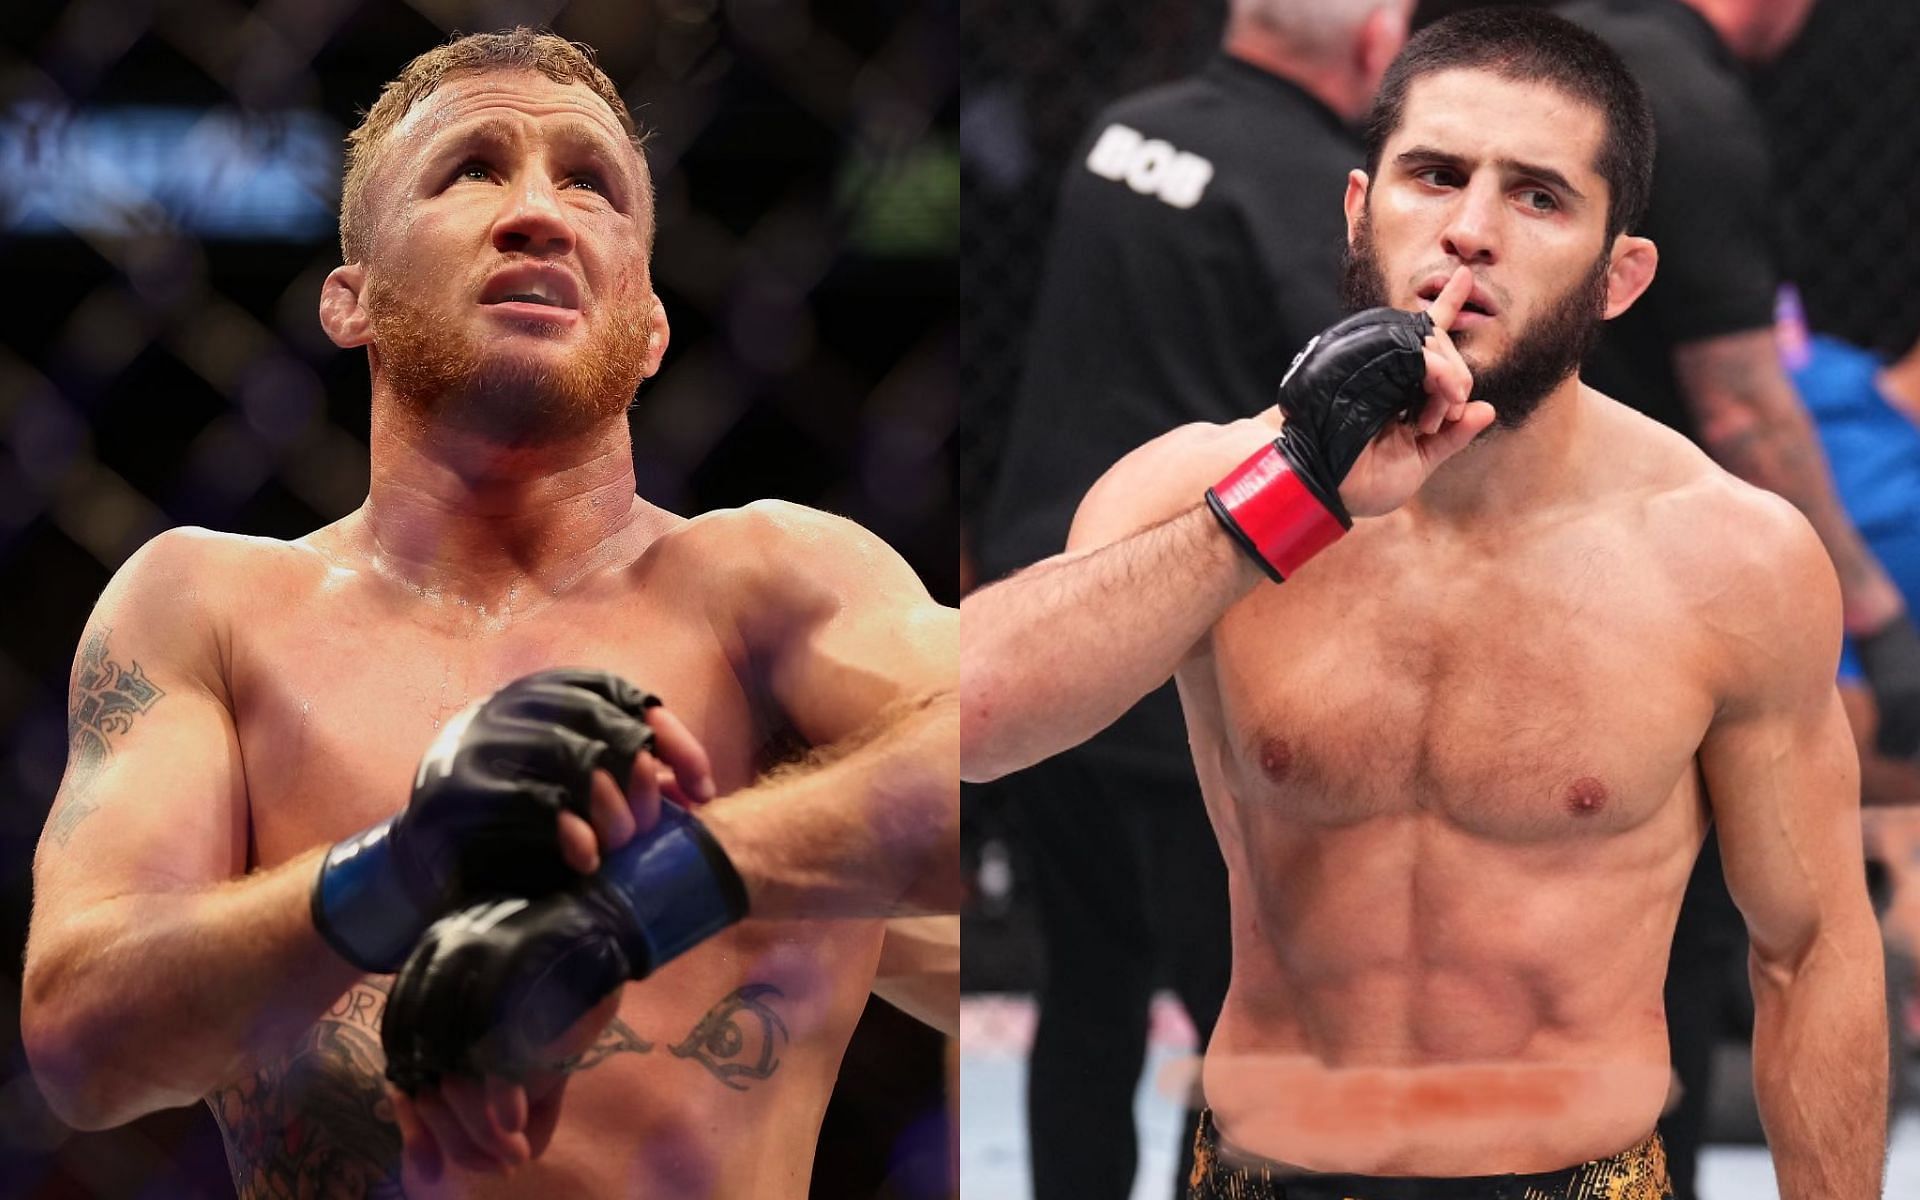 A loss for Justin Gaethje (left) at UFC 300 could see the end of his title run, says Islam Makhachev (right) [Images Courtesy: @GettyImages, @islam_makhachev on Instagram]